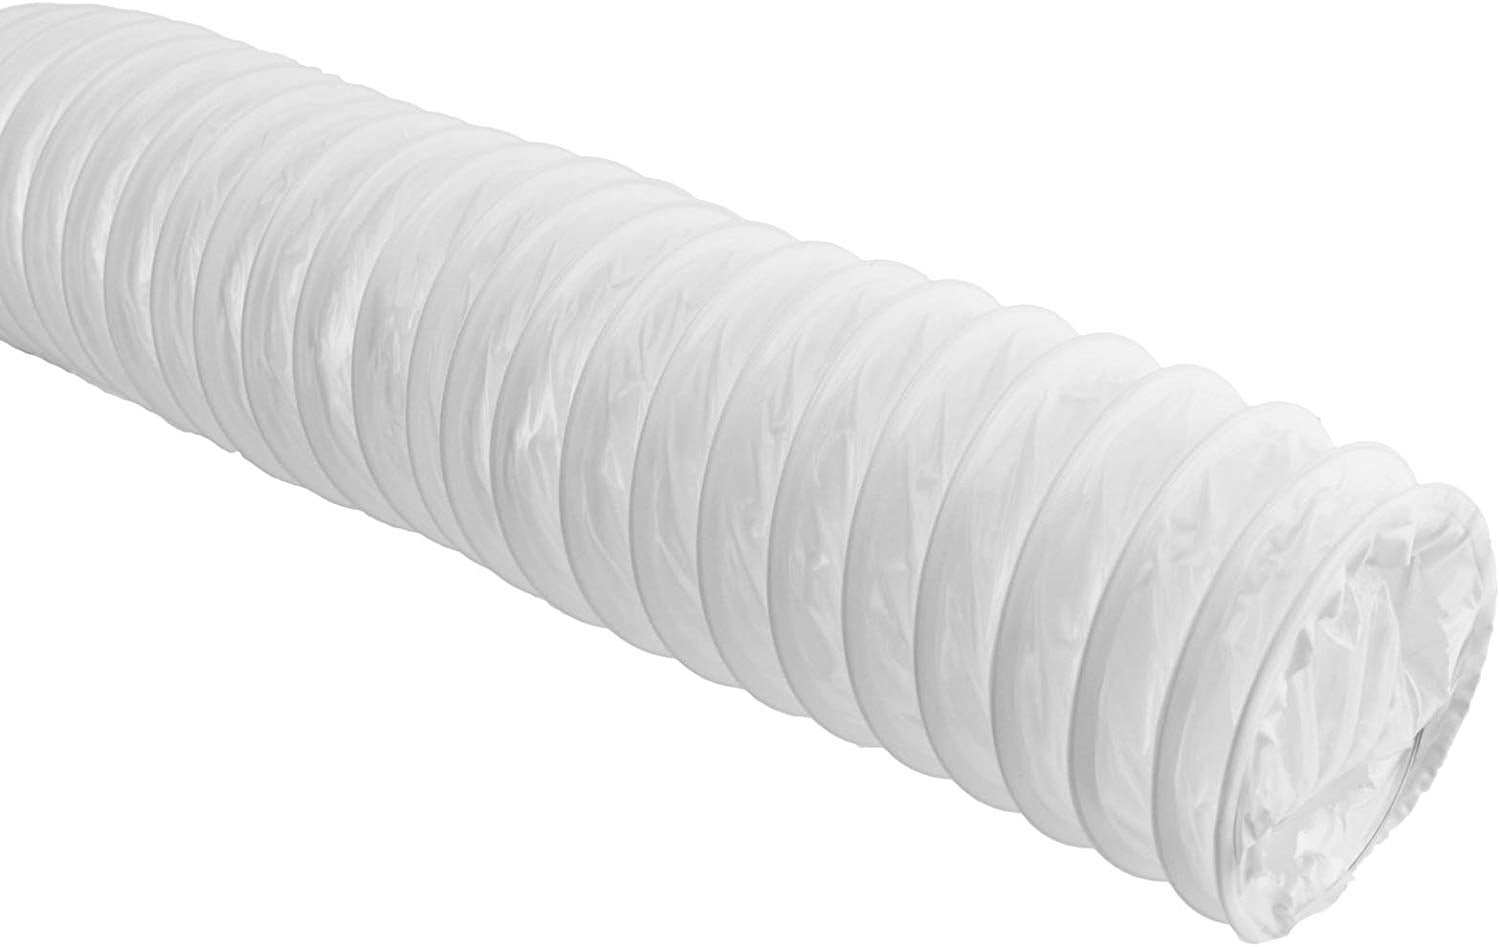 Universal Tumble Dryer Condenser Vent Box + Extra Long 6m Vent Hose Pipe (4" / 100mm)